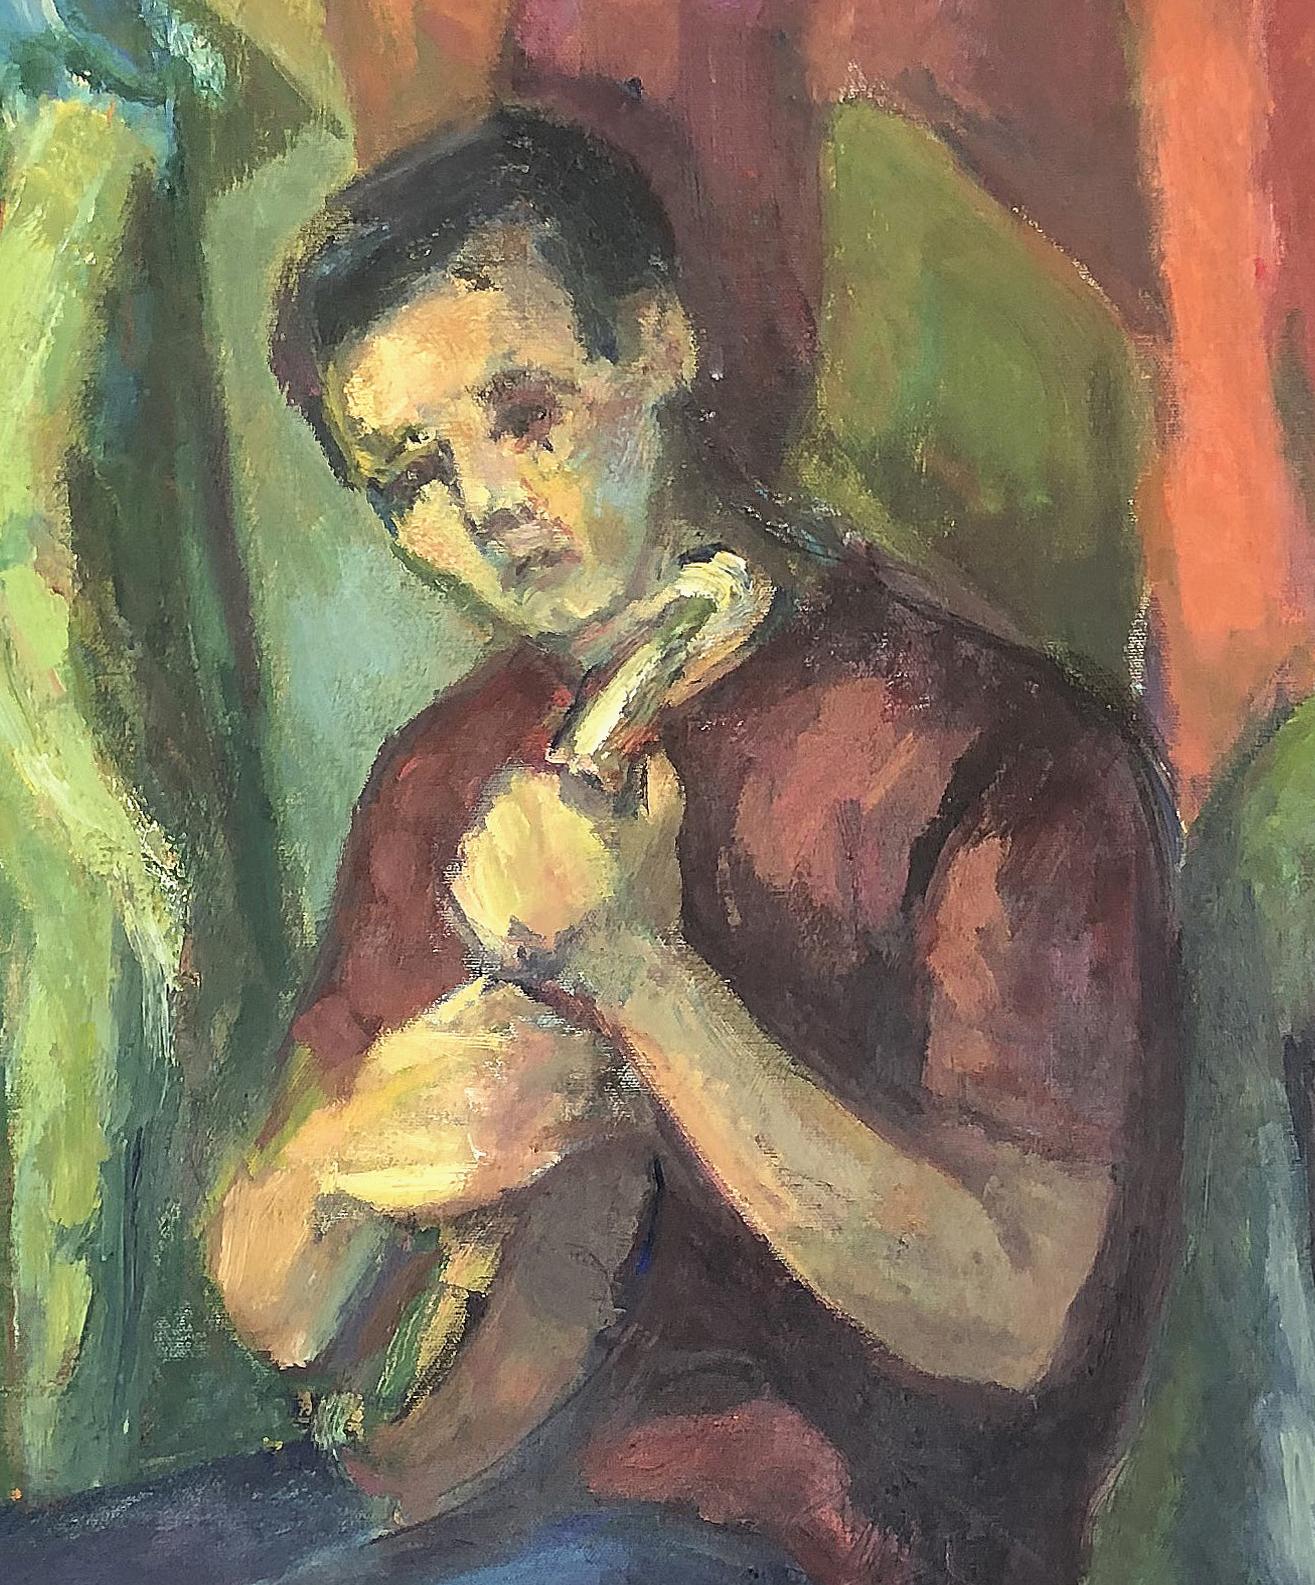 Mid-Century Modern abstract oil painting of a boy and mandolin

Offered for sale is a large Mid-Century Modern abstract cubist oil painting of a boy with mandolin. The work is oil on linen canvas and retains the original wood frame with a giltwood